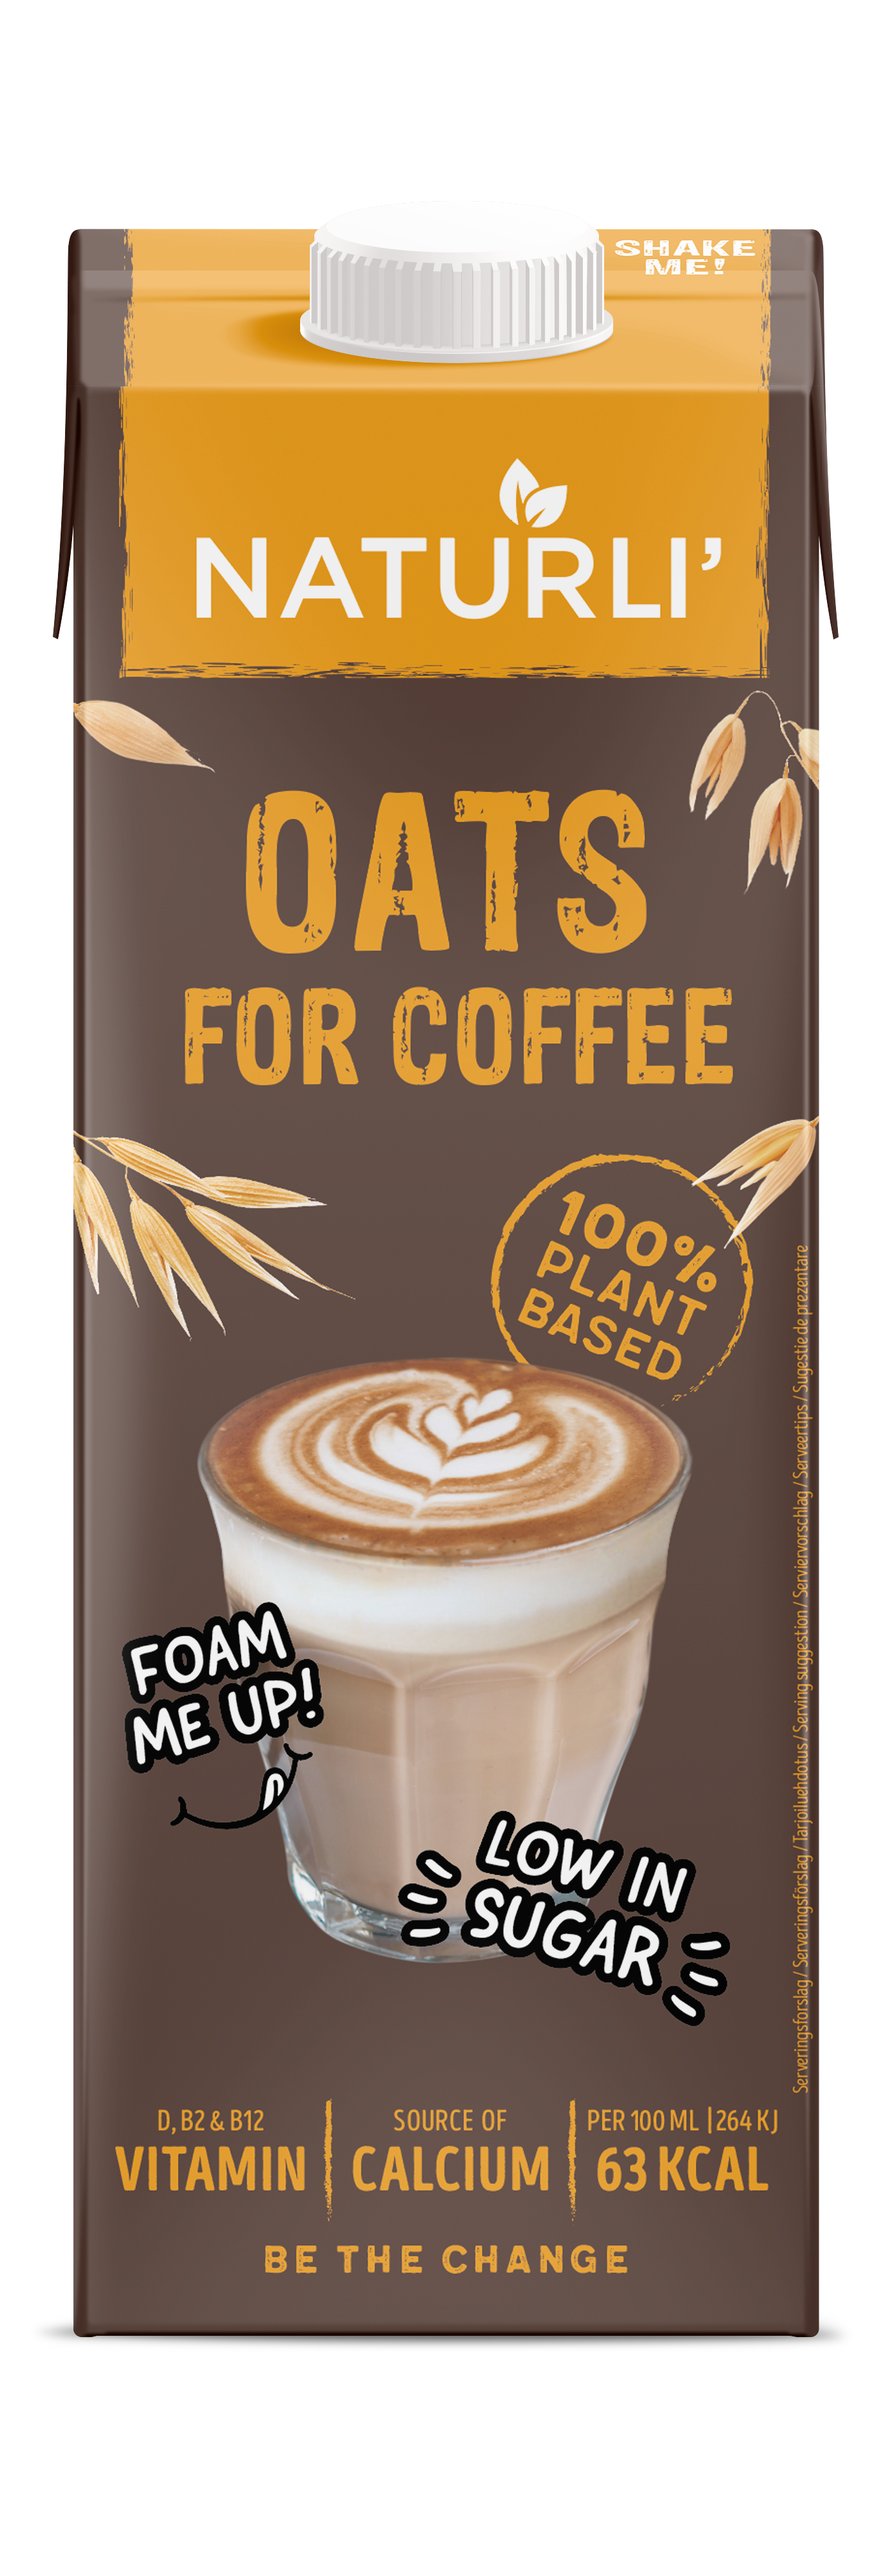 Oats for Coffee